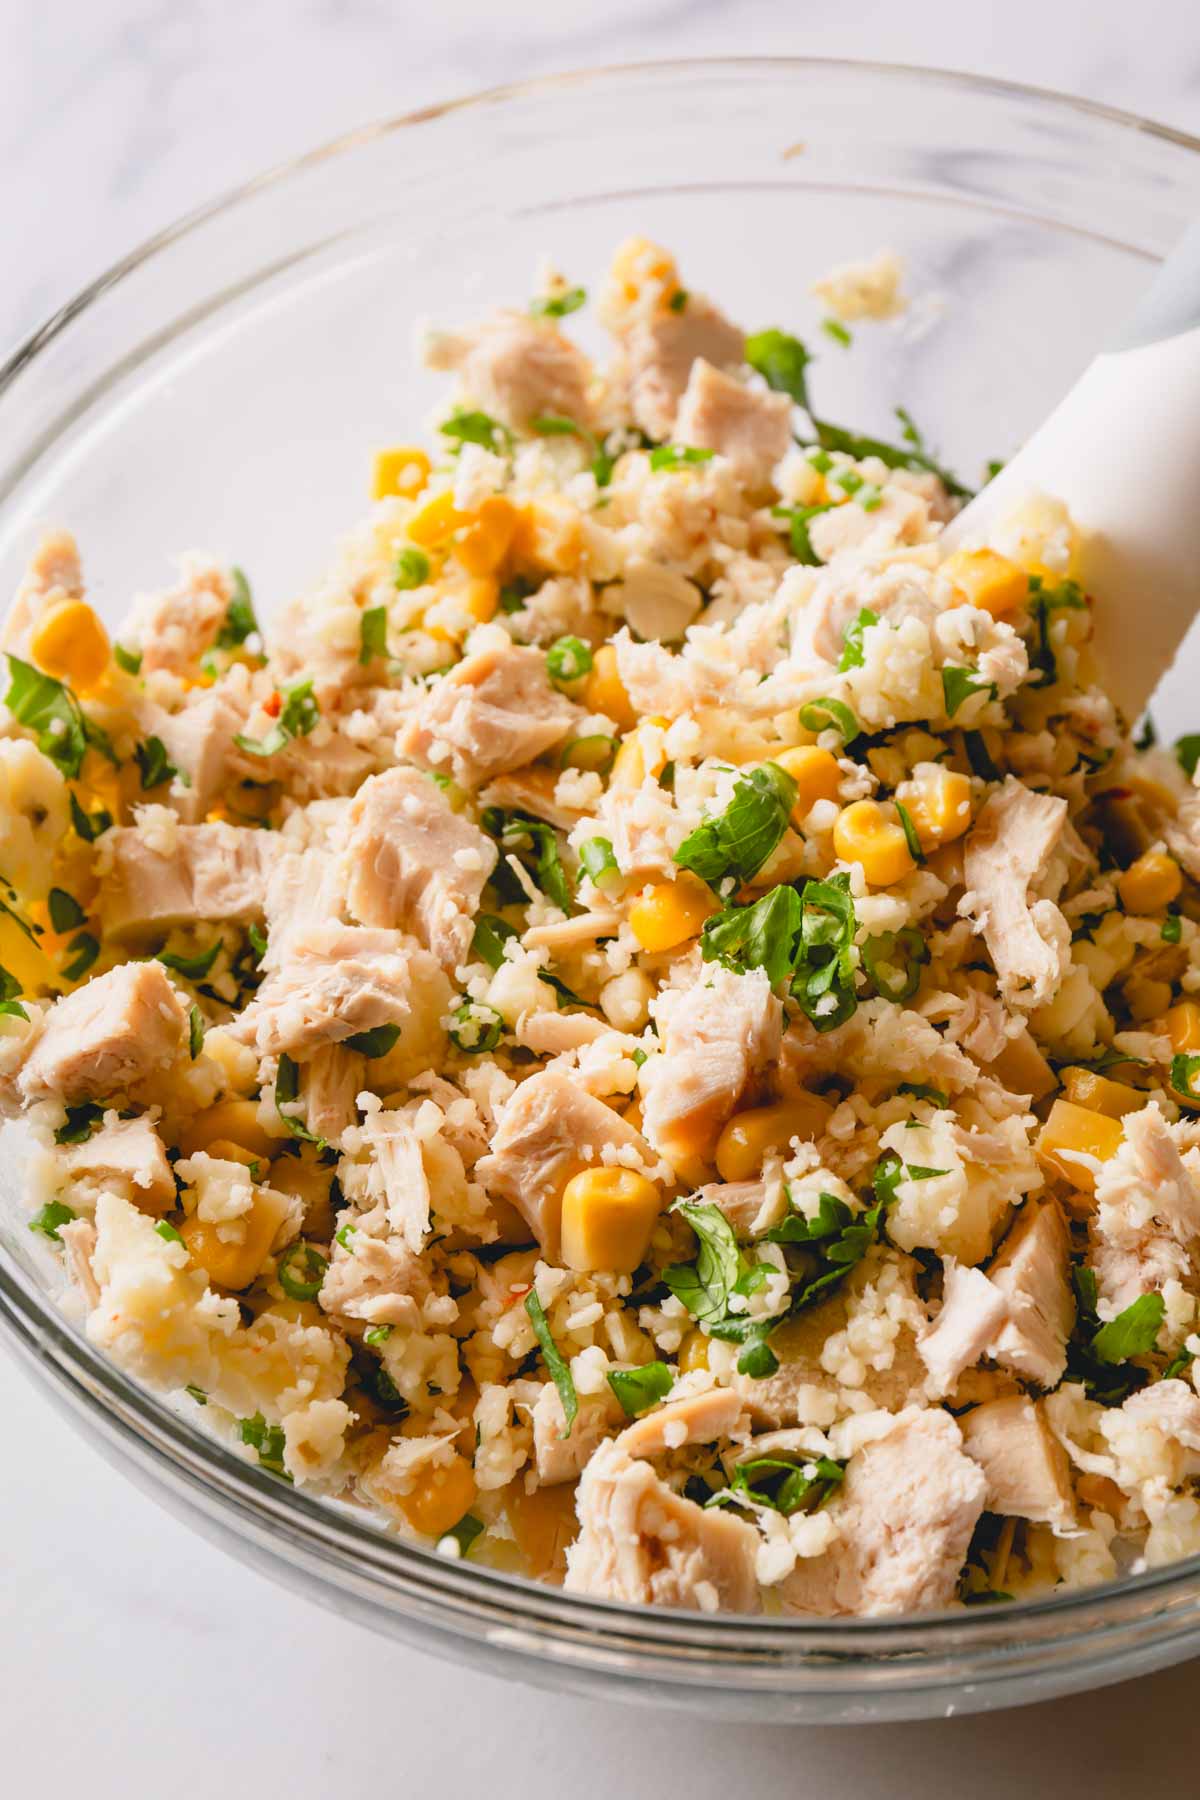 A chicken, rice, corn, and herb mixture being combined in a bowl.